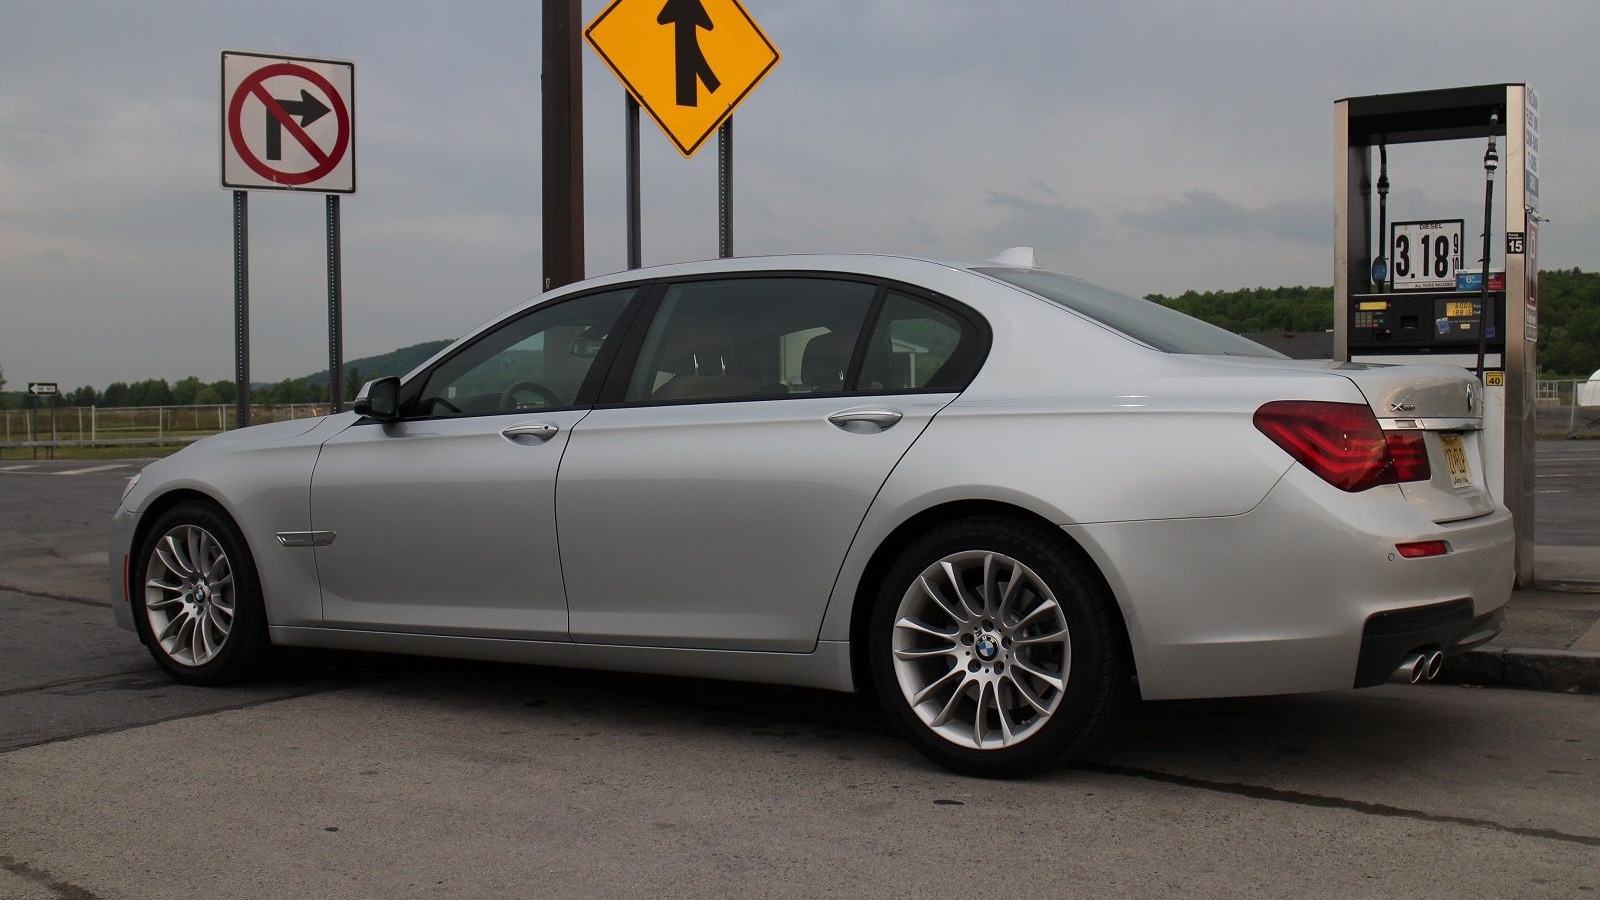 2015 BMW 740Ld xDrive Diesel: Fuel Economy Review